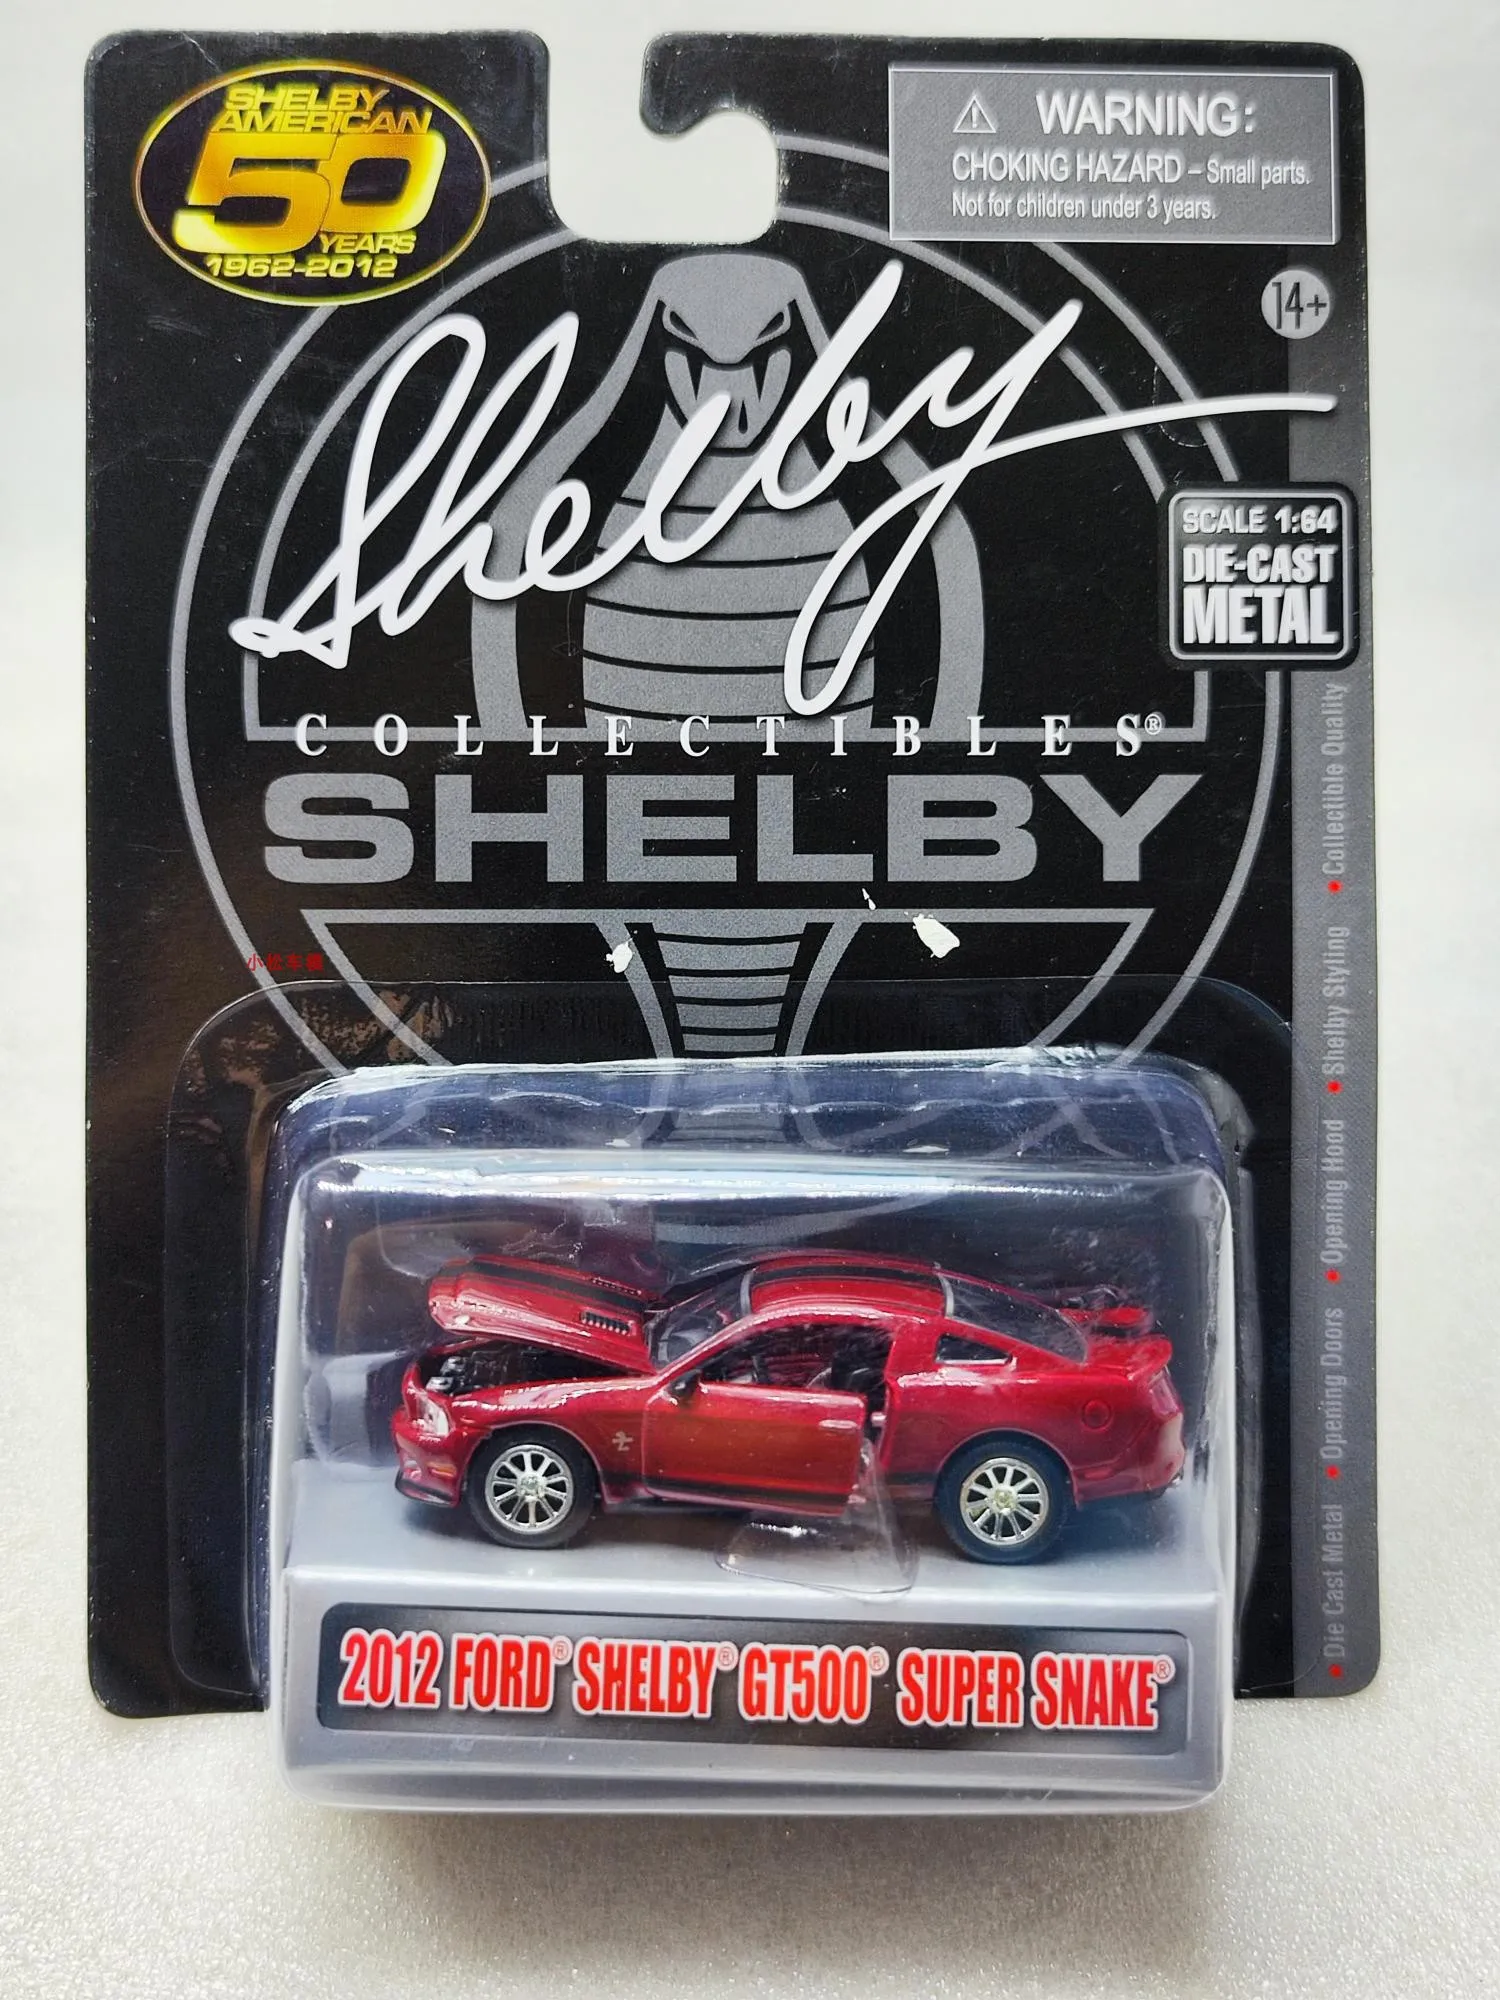 

1:64 2012 Ford SHELBY GT500 SUPER SNAKE Diecast Metal Alloy Model Car Toys For Gift Collection